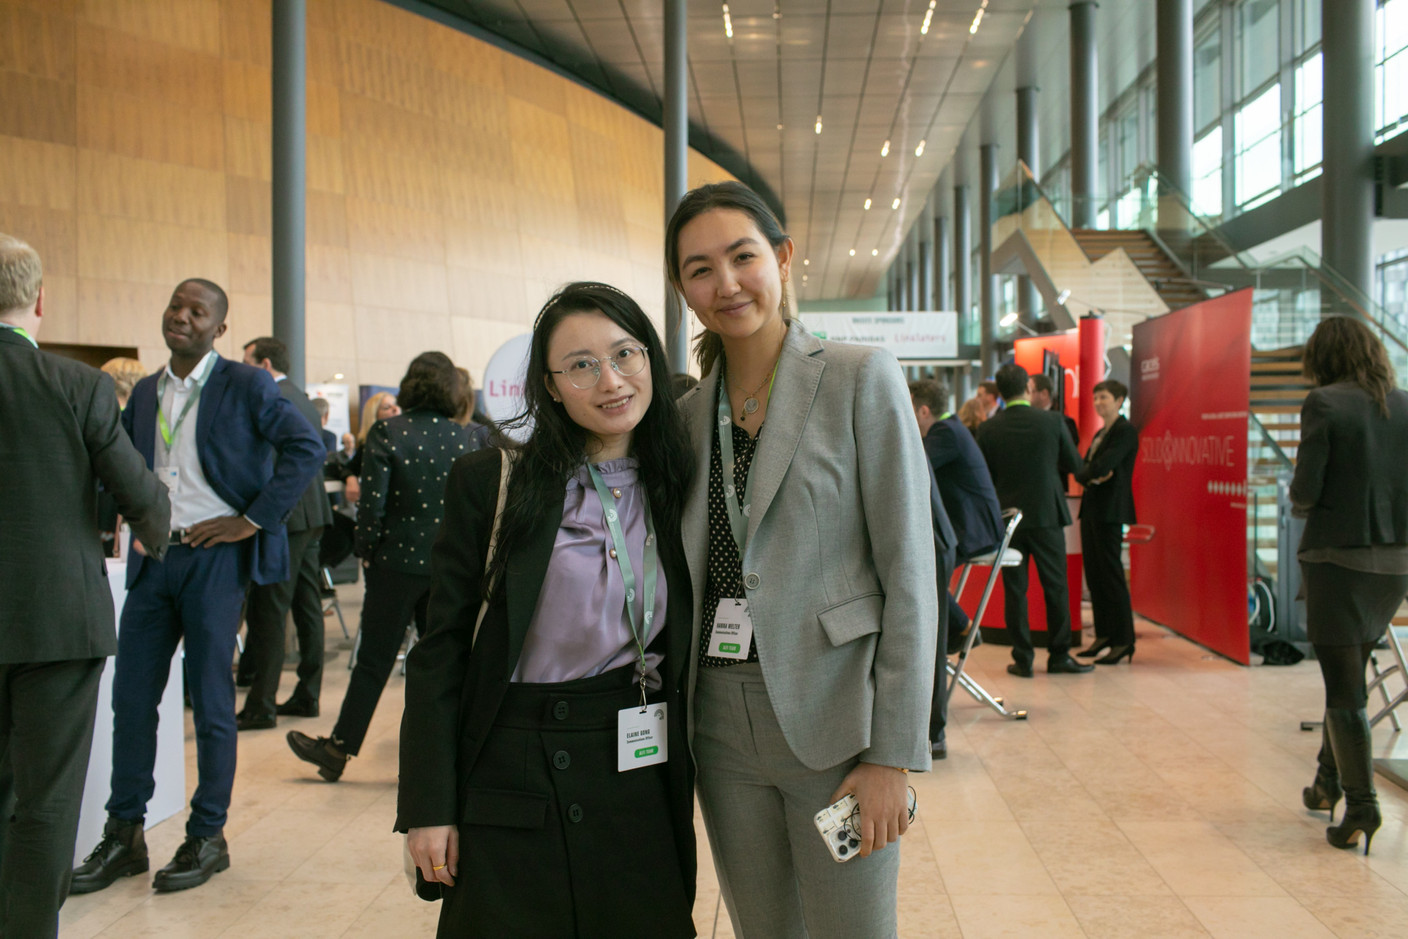 Elaine Gong and Hanna Welter of the Association of the Luxembourg Fund Industry. Photo: Matic Zorman / Maison Moderne